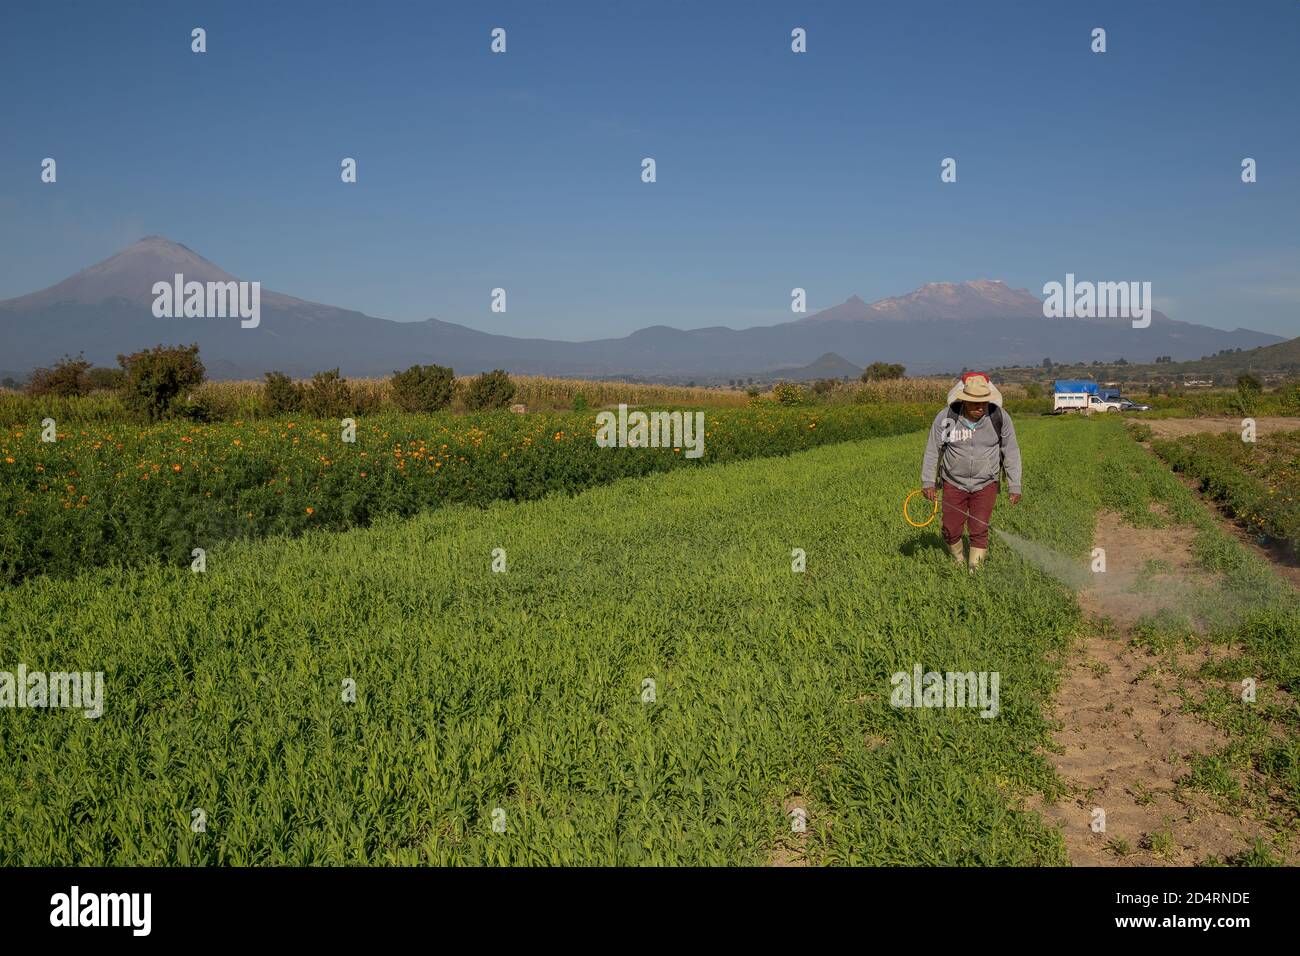 View of a Hispanic man spraying pesticides in the field Stock Photo